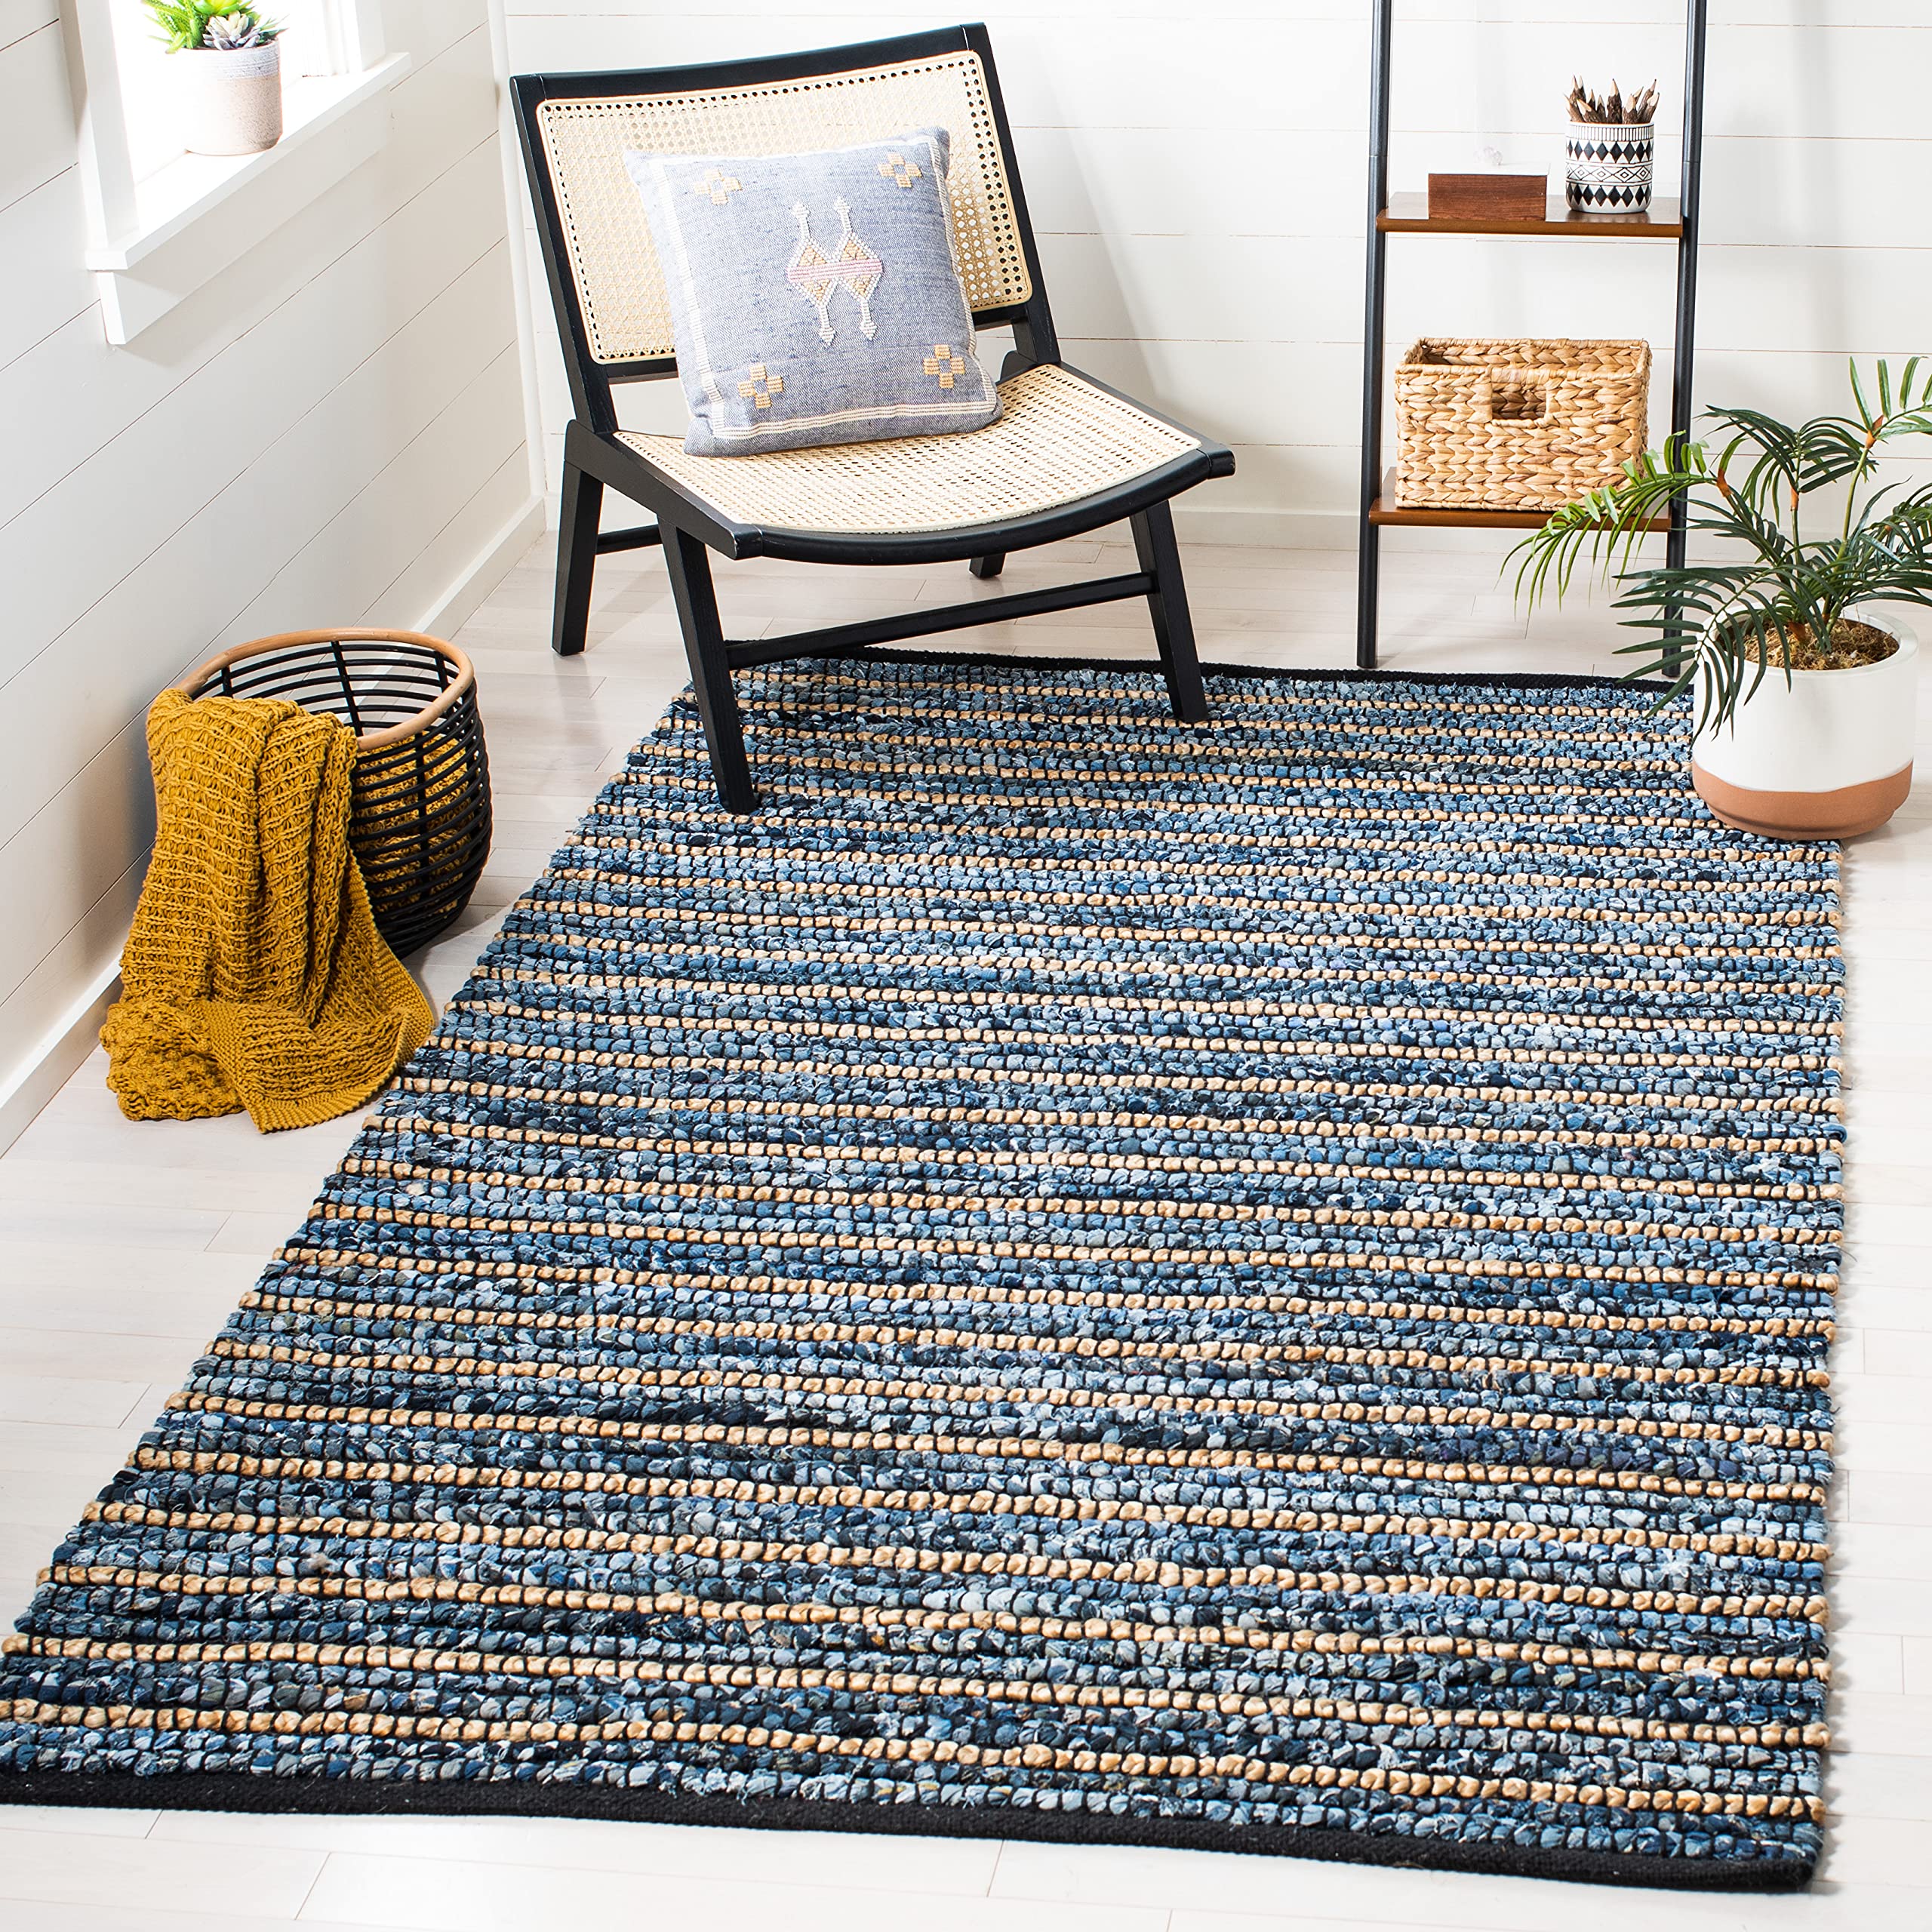 What Is Accent Rug Used For